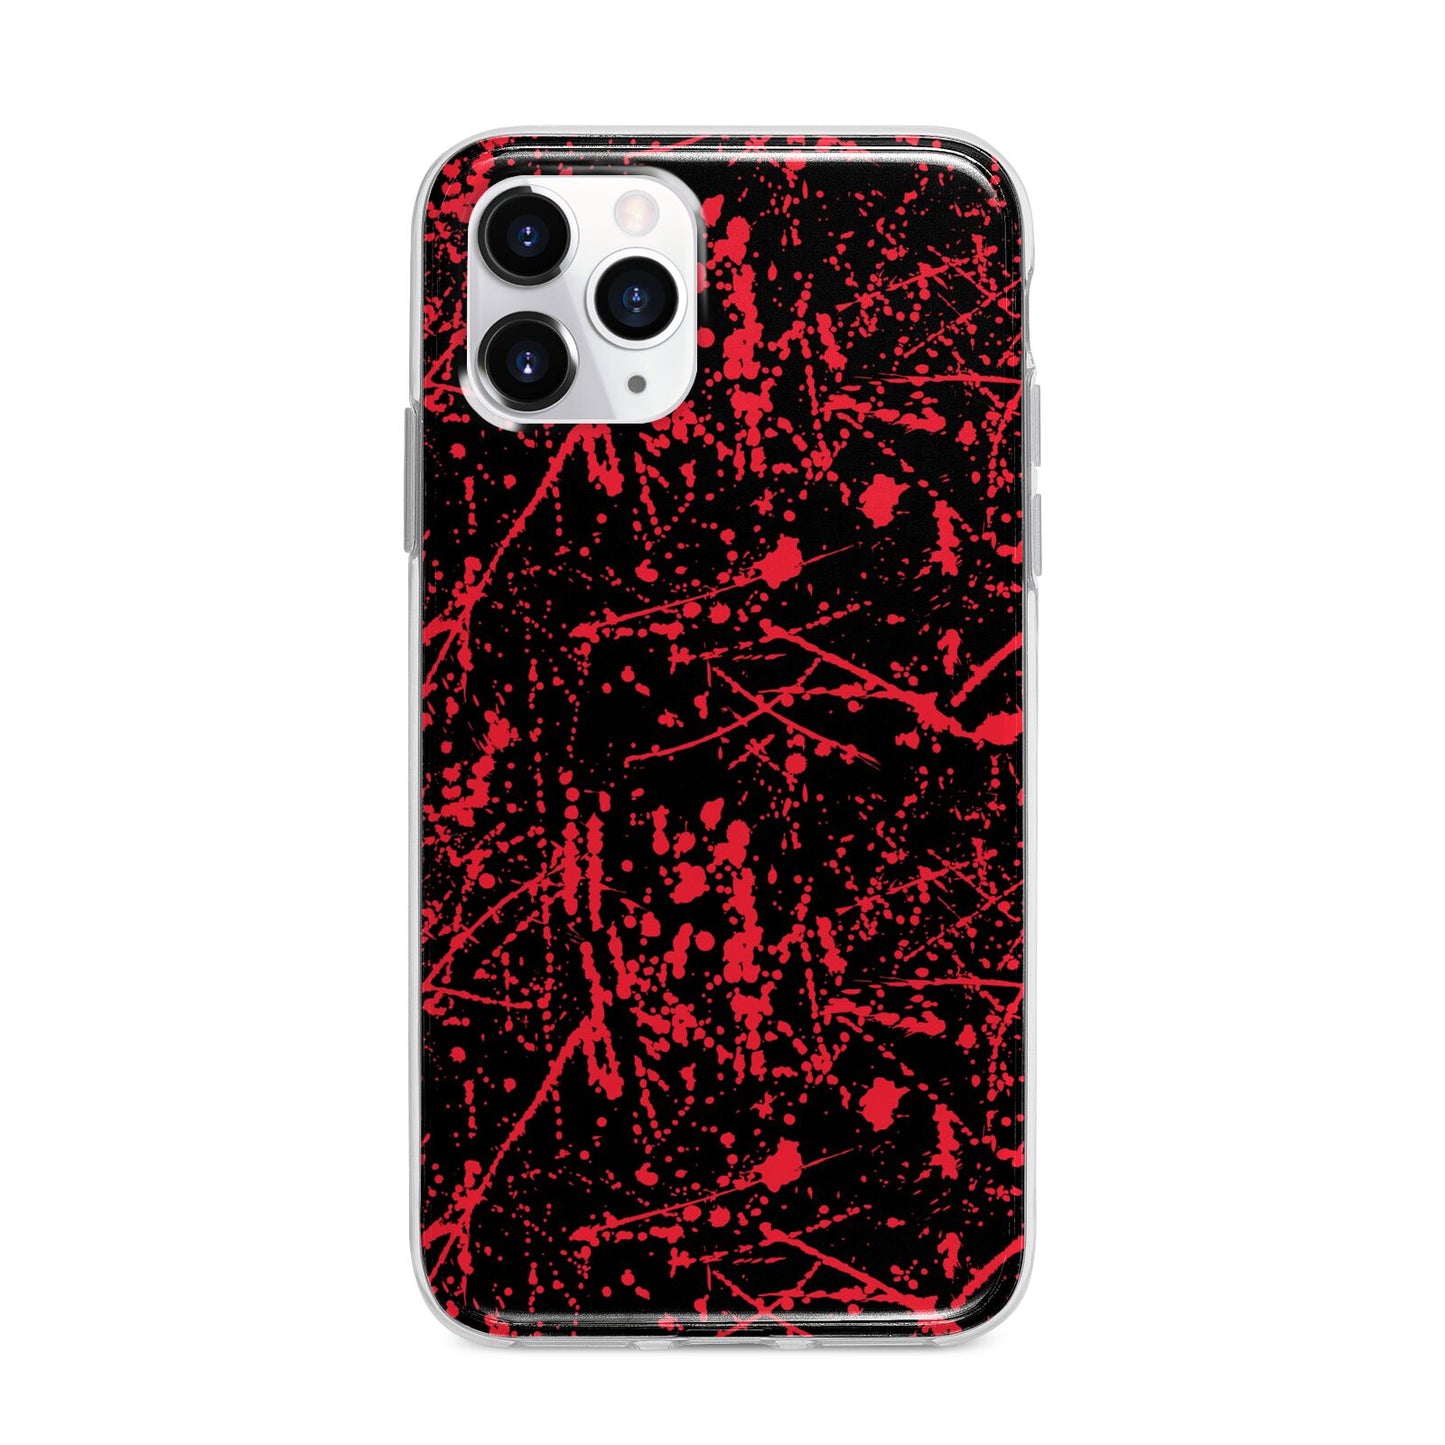 Blood Splatters Apple iPhone 11 Pro Max in Silver with Bumper Case